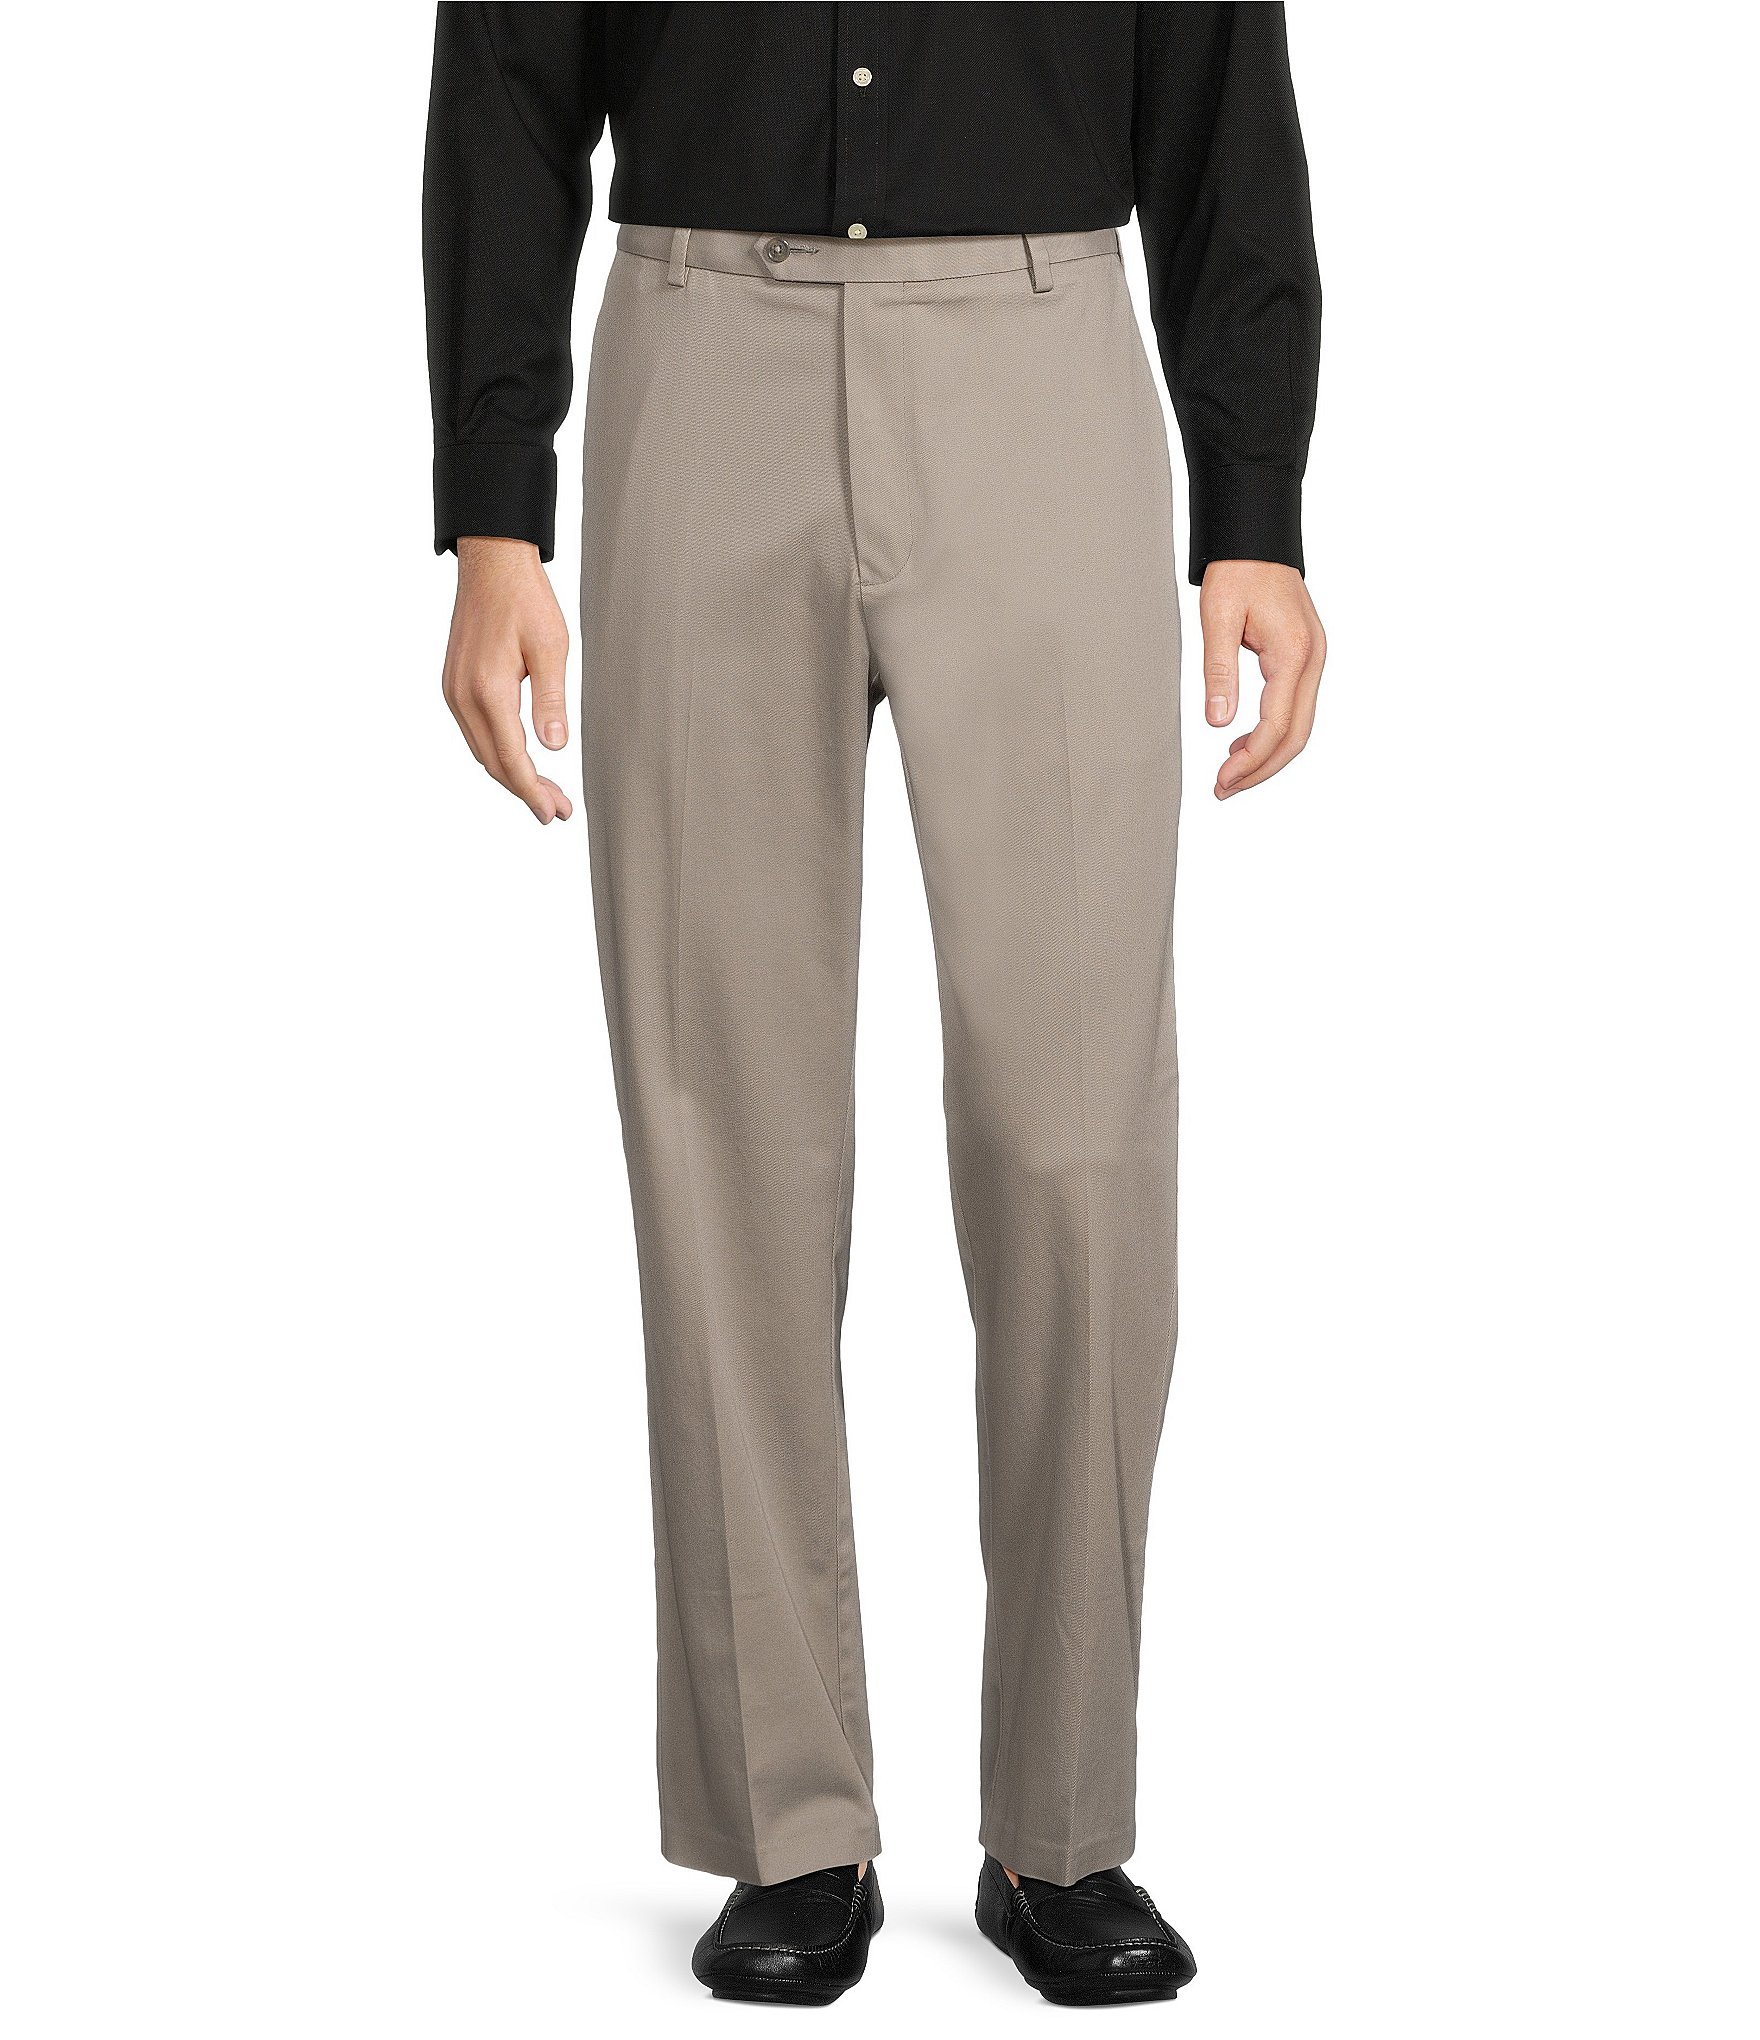 Roundtree & Yorke TravelSmart Classic Fit Flat Front Non-Iron Chino ...